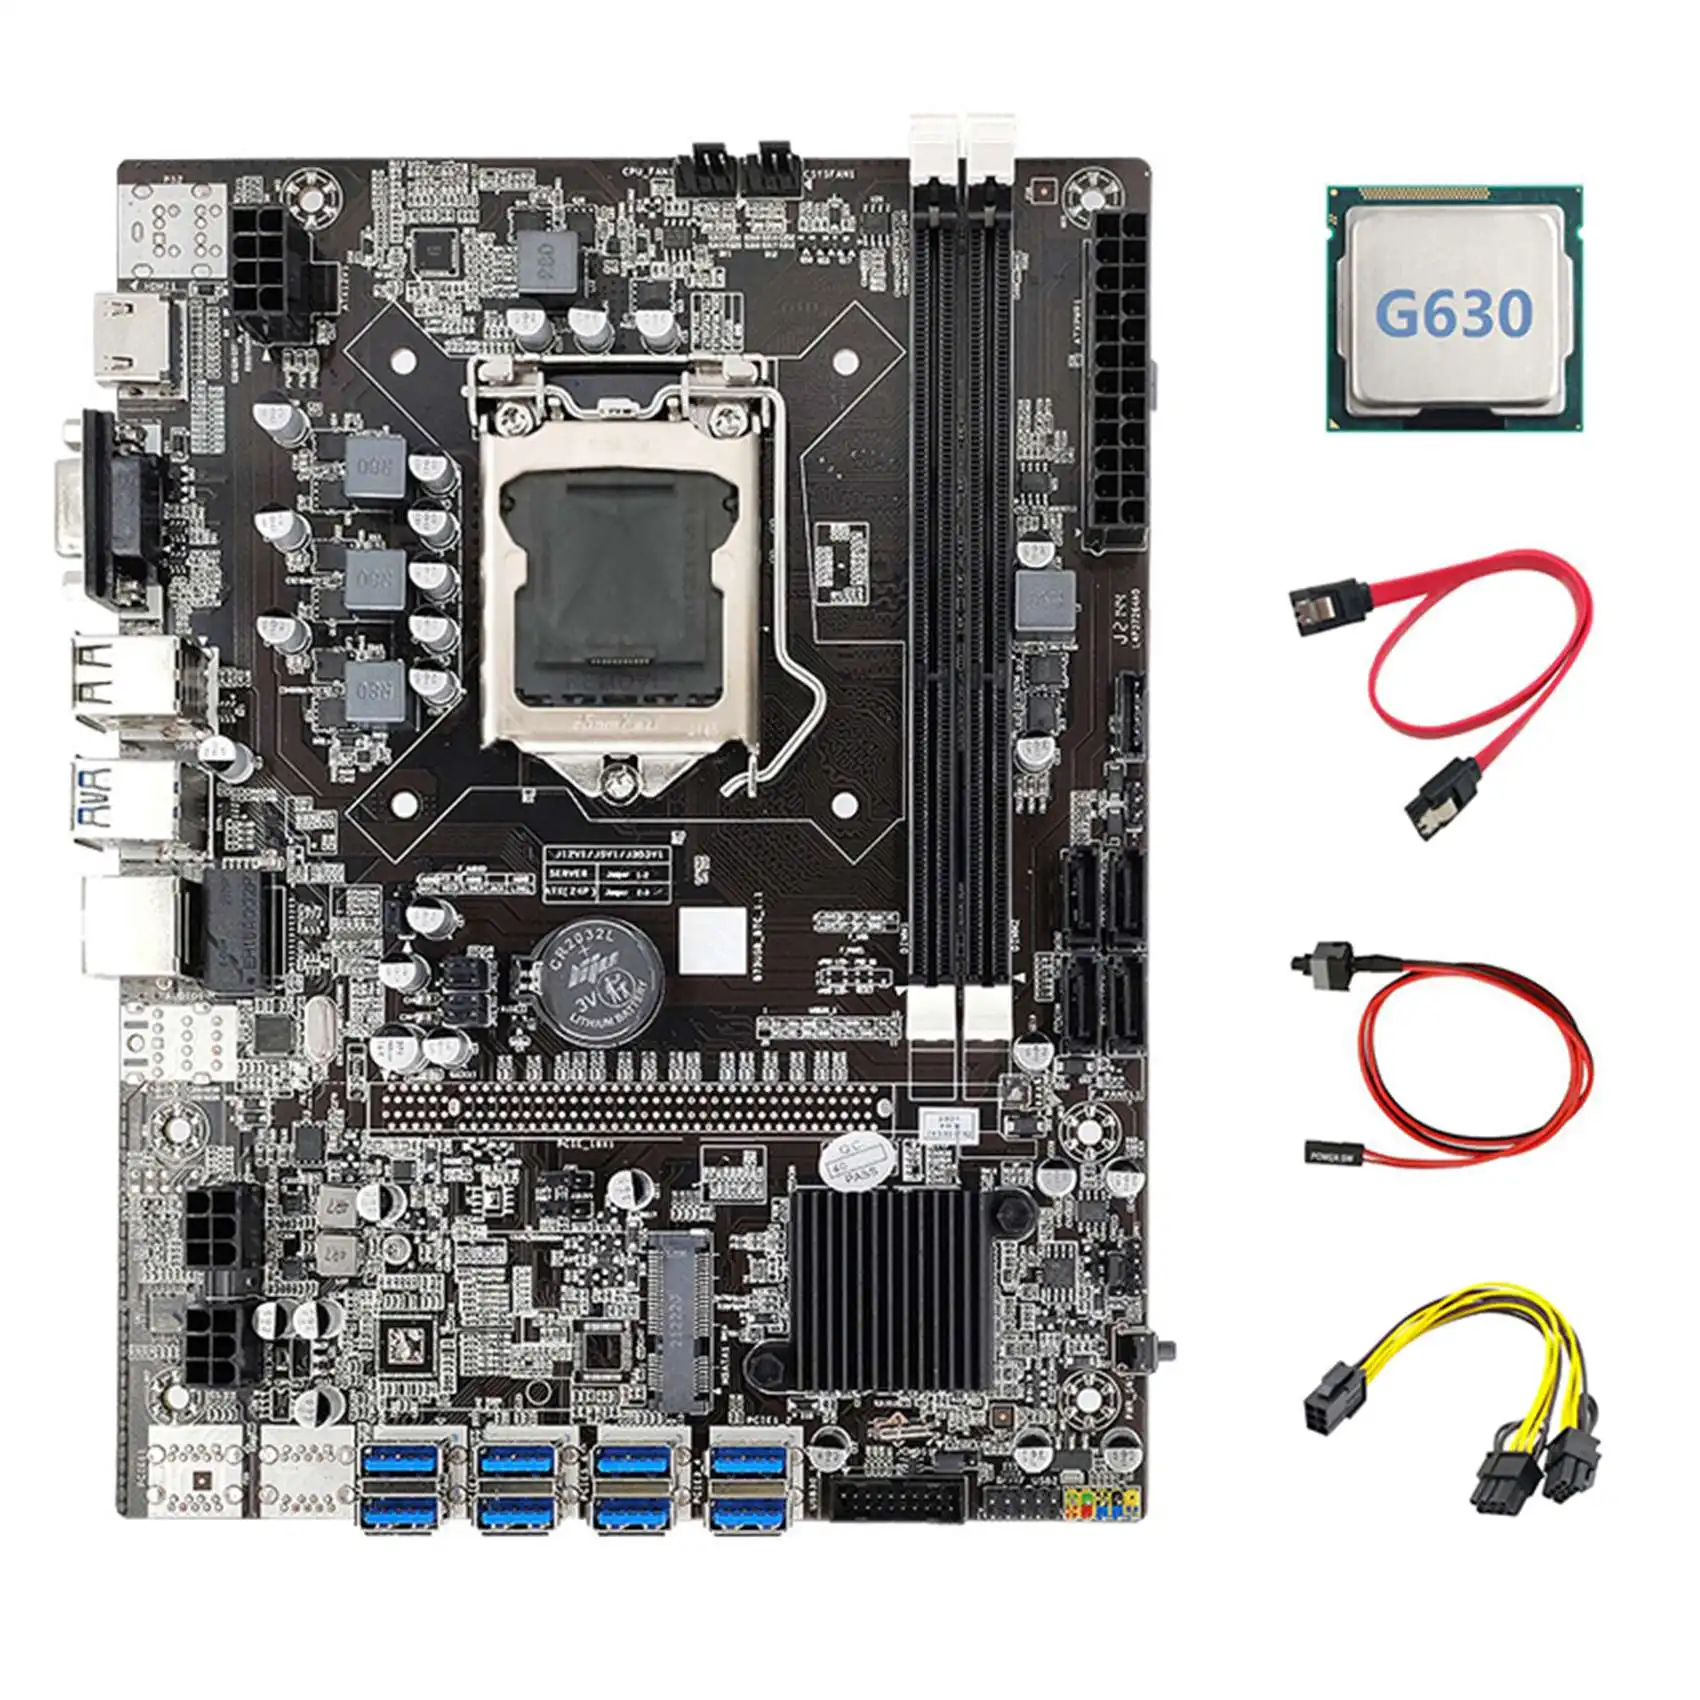 B75 ETH Mining Motherboard 8XPCIE to USB+G630 CPU+6Pin to Dual 8Pin Cable+SATA Cable+Switch Cable LGA1155 B75 Mainboard